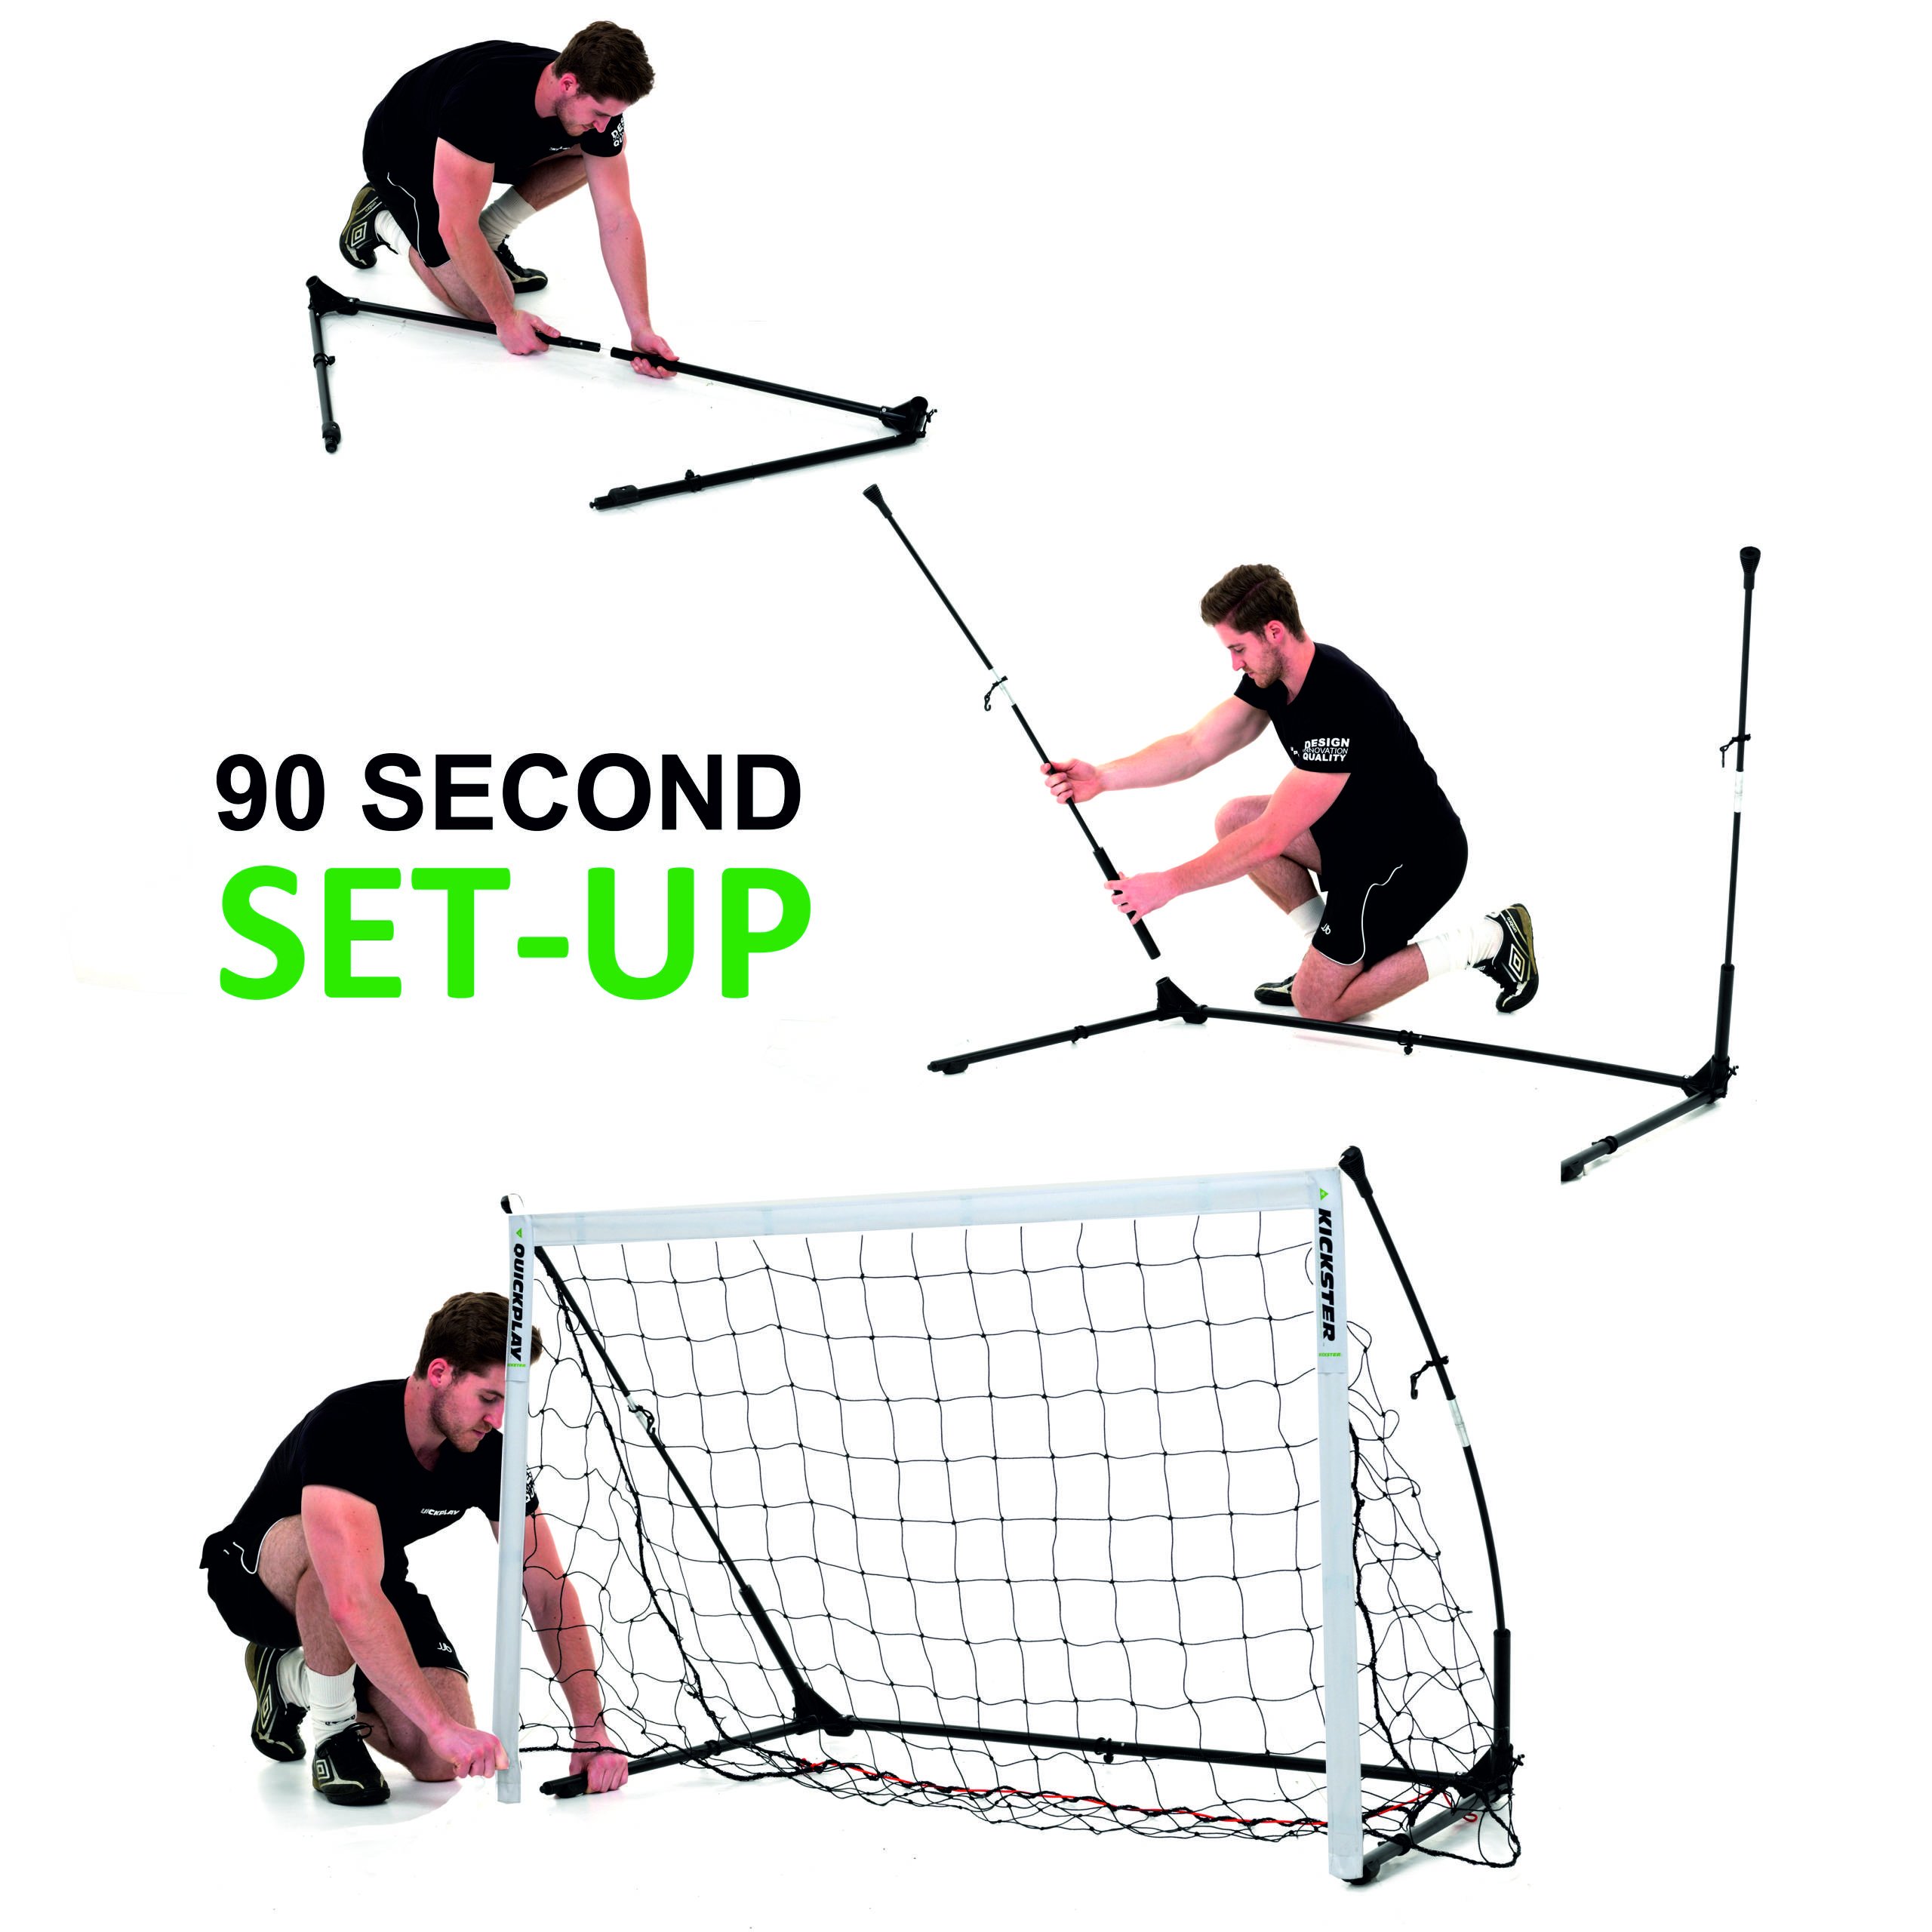 QUICKPLAY Kickster Elite Portable Soccer Goal with Integrated Weighted Base for Indoor & Outdoor Soccer [Single Goal] - image 3 of 6